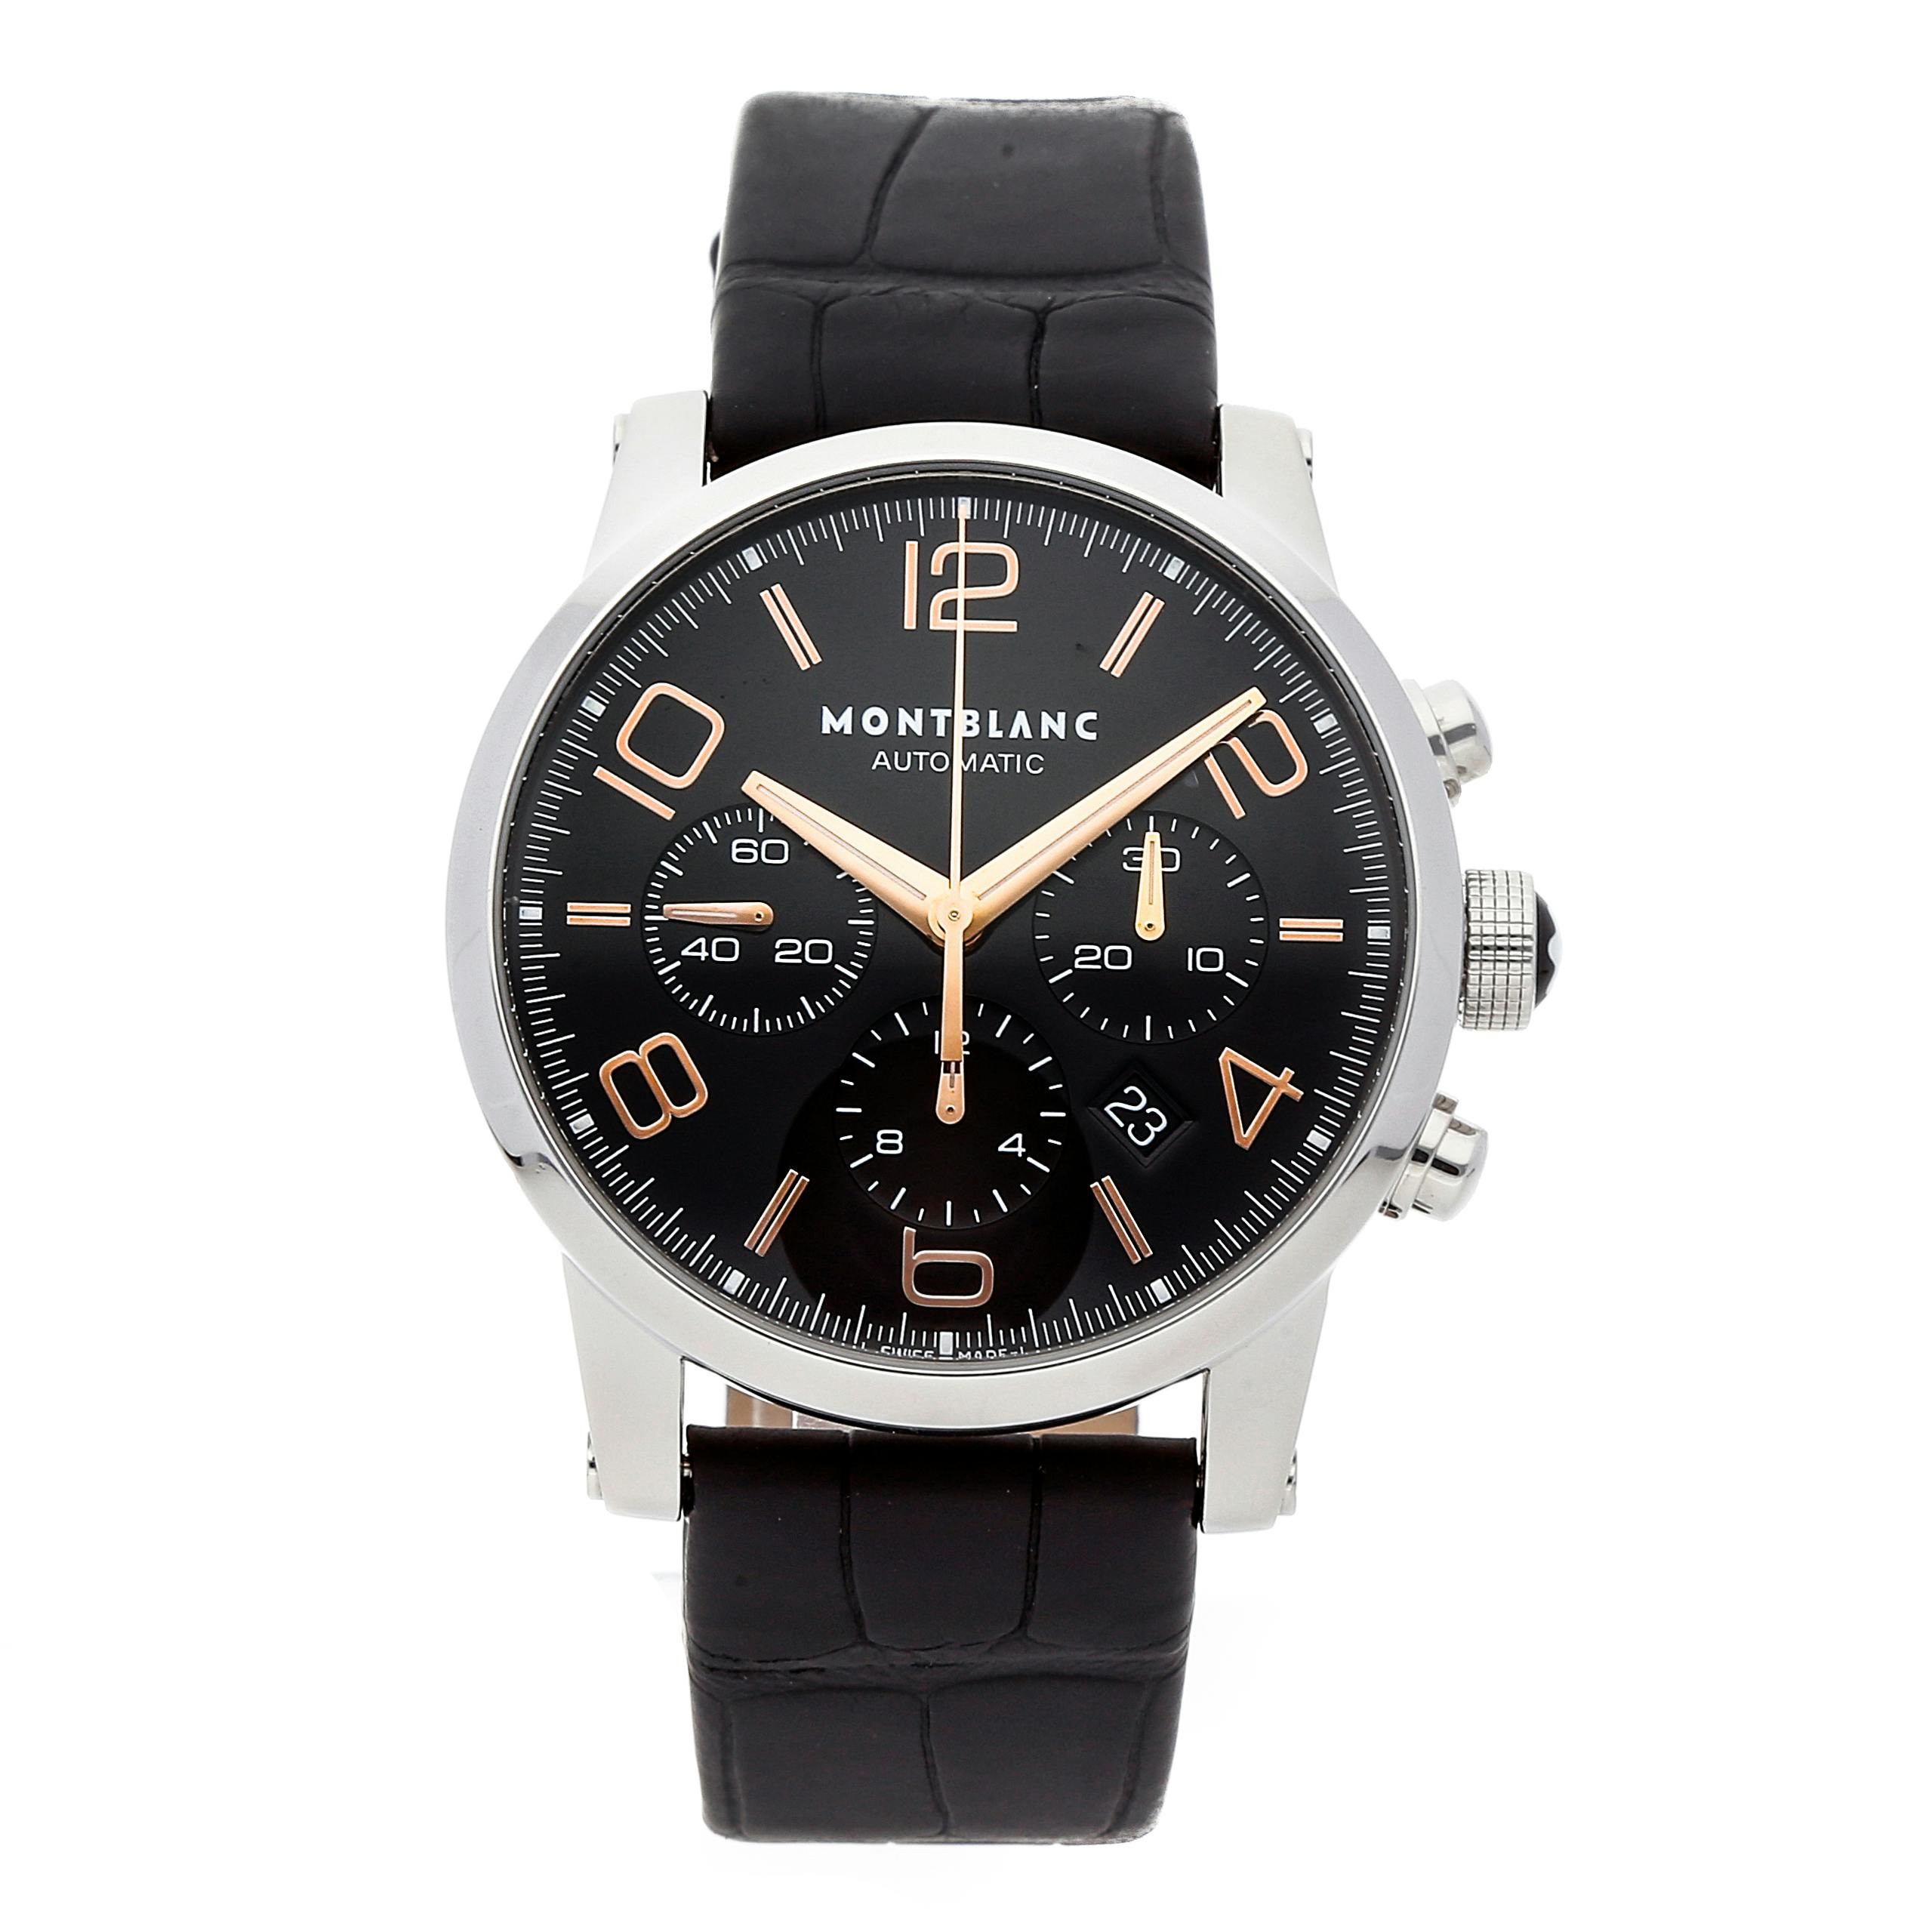 Montblanc Sport Chronograph for Rs.149,940 for sale from a Seller on  Chrono24